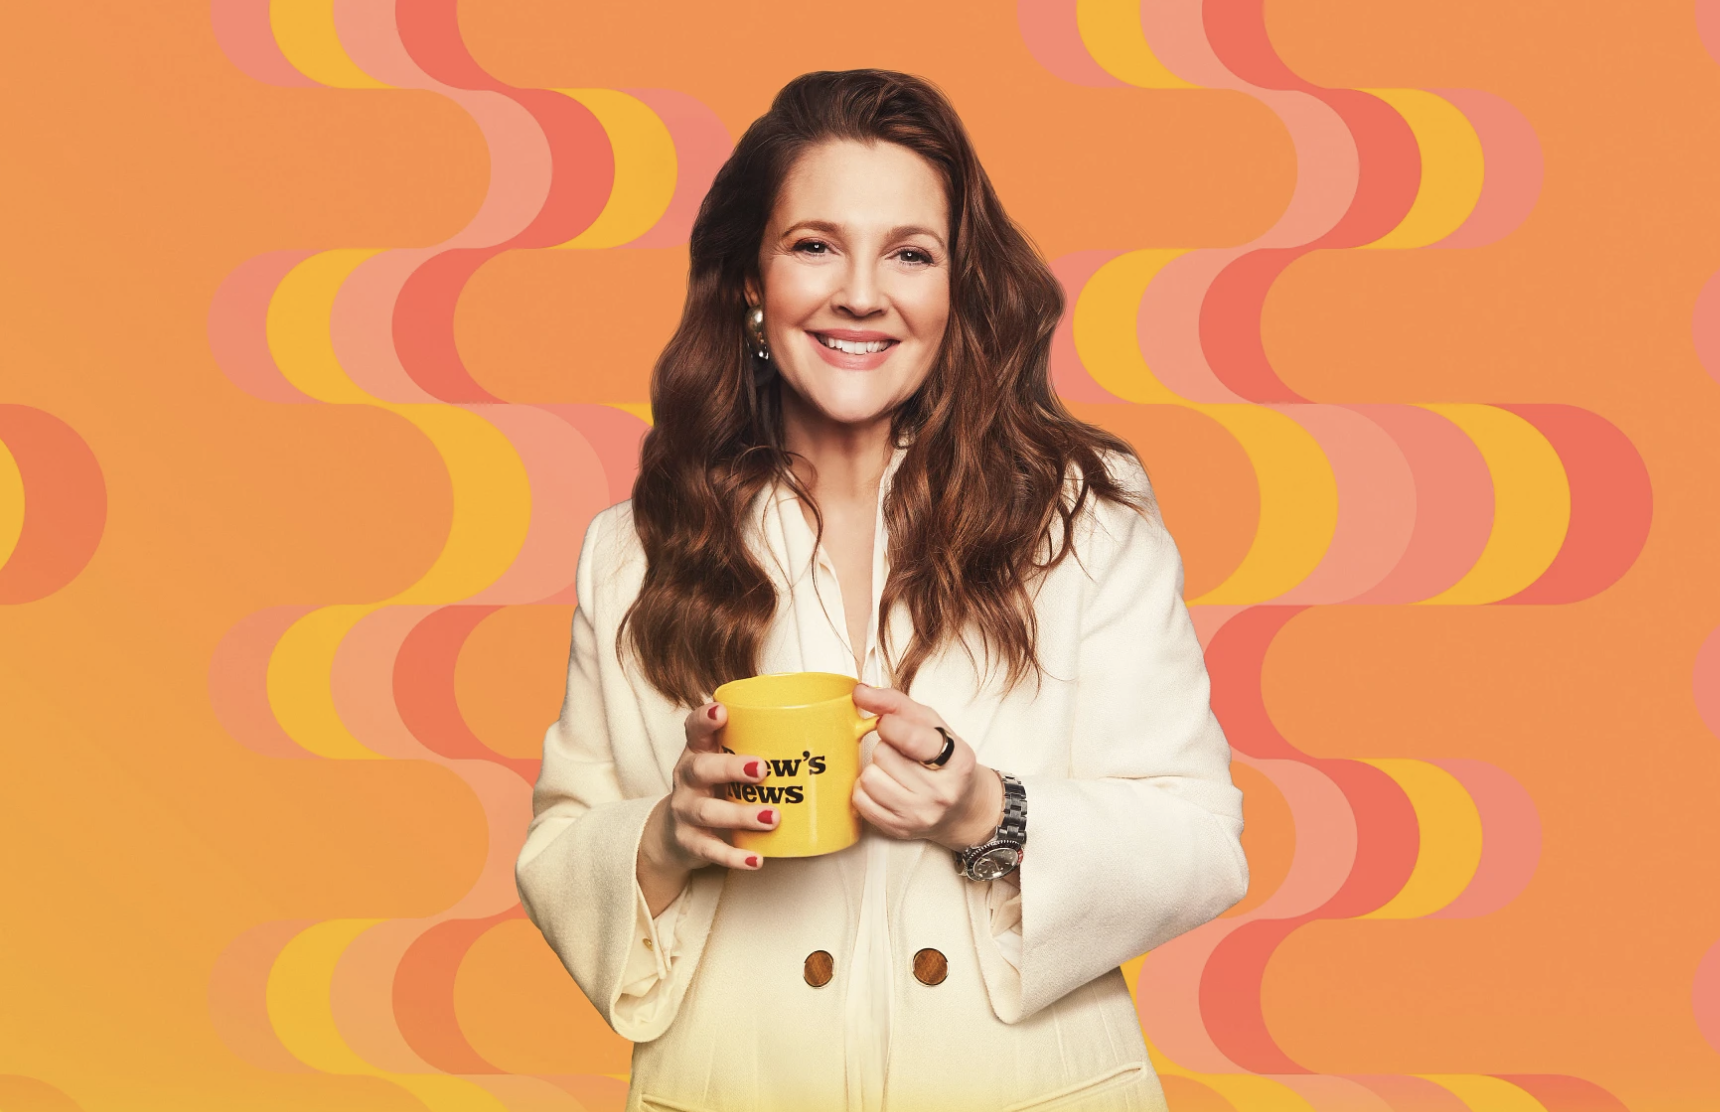 Snap a photo by Drew Barrymore's news desk at this new pop-up in NYC